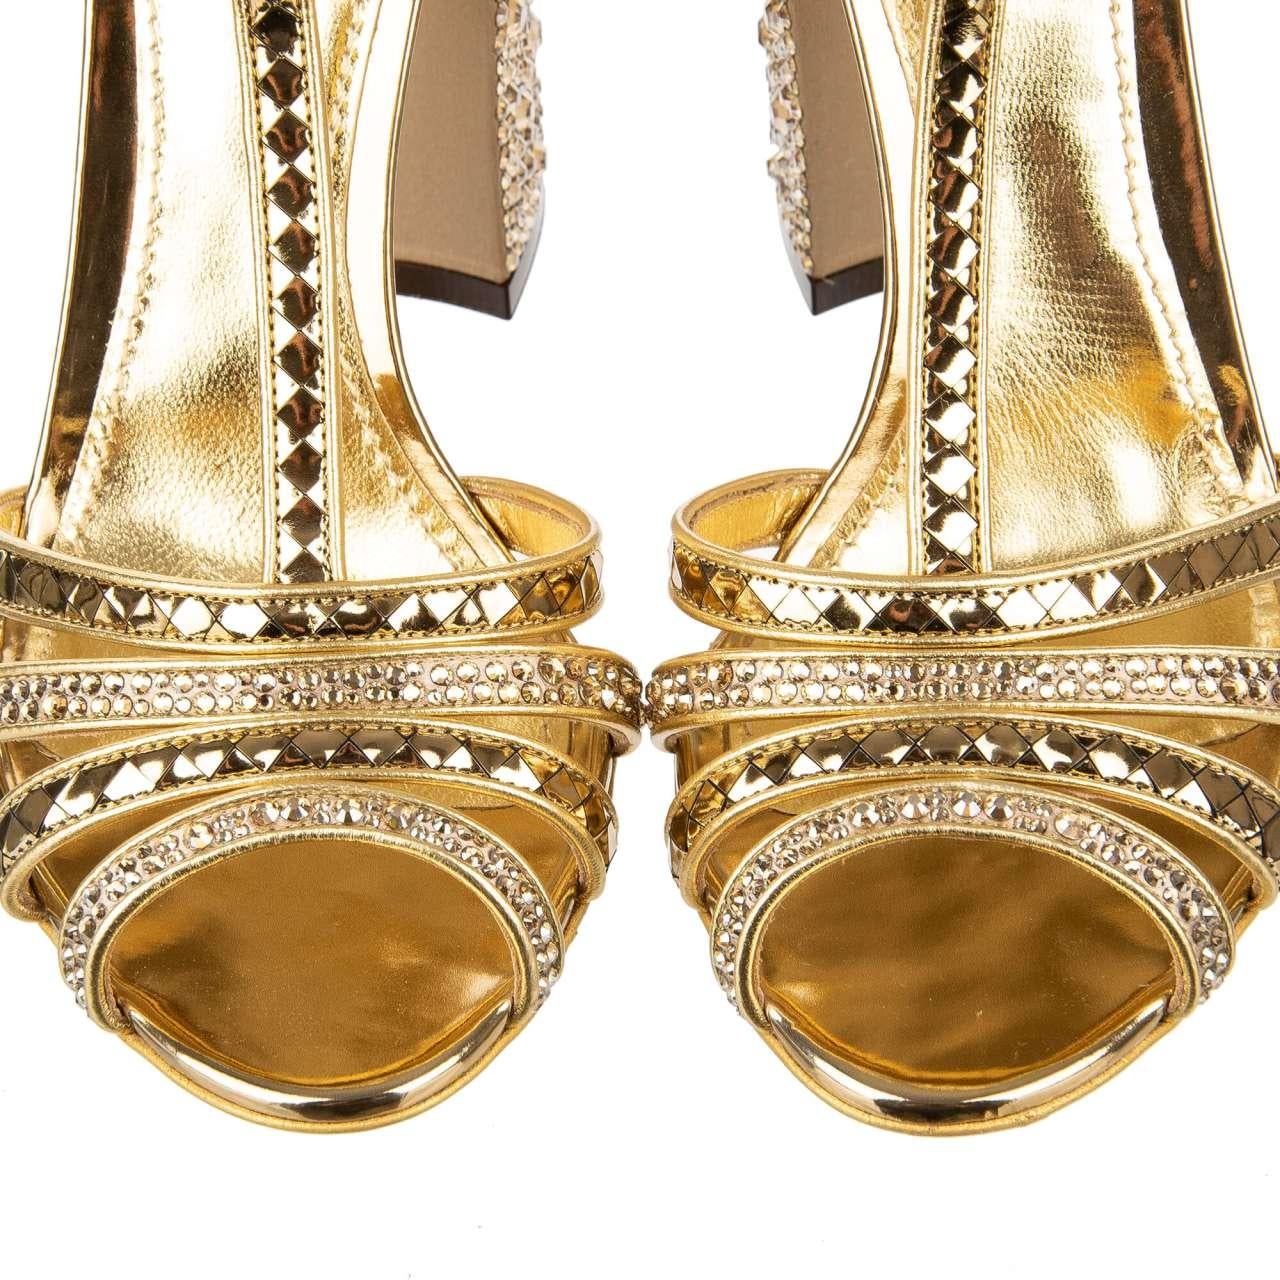 Dolce & Gabbana Disco High Heel Sandals Pumps KEIRA with Crystals Gold 40 10 For Sale 2